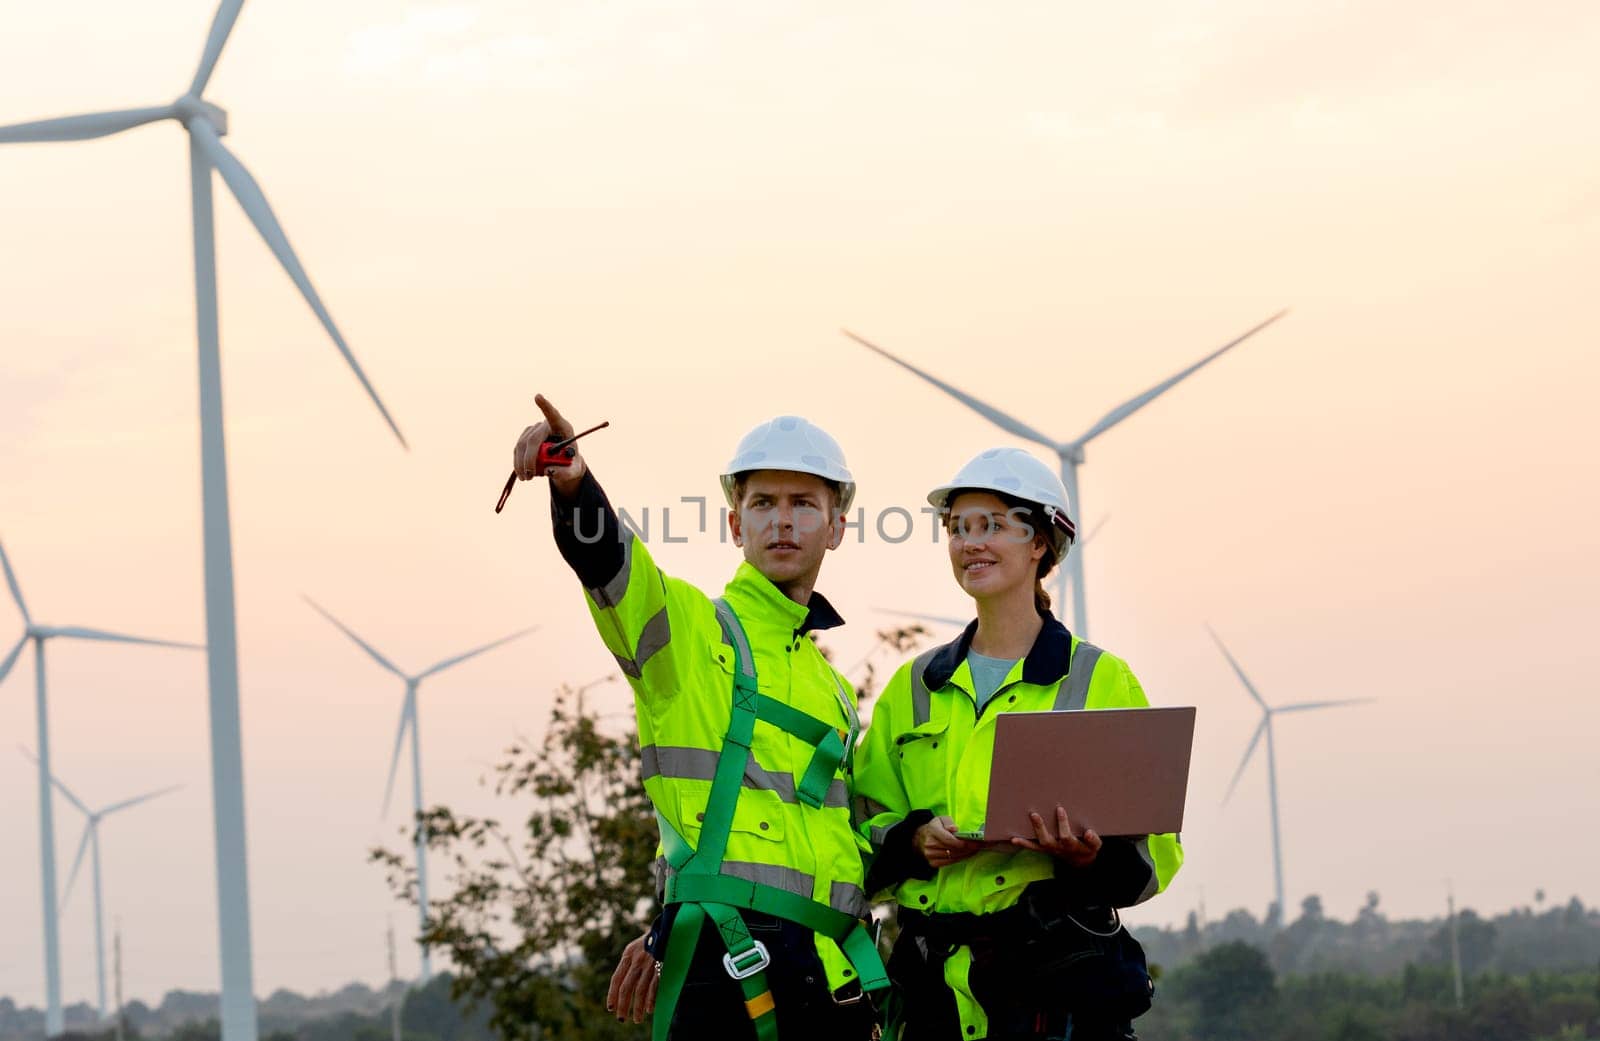 Technician workers use laptop to work and stay with her co-worker point to left side in evening with windmill or wind turbine on the background. by nrradmin